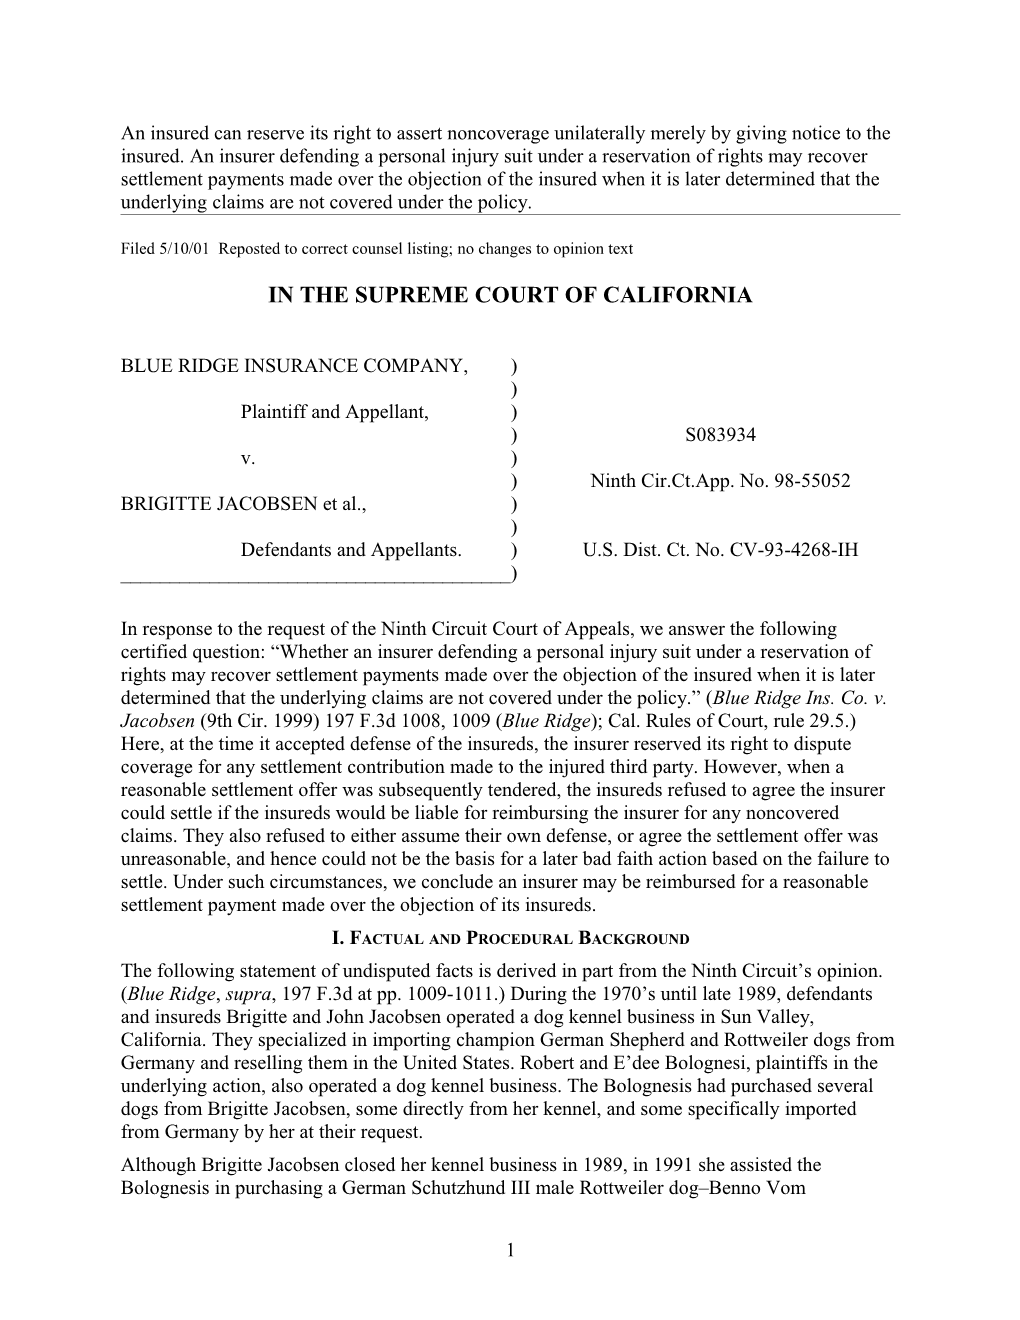 Filed 5/10/01 Reposted to Correct Counsel Listing; No Changes to Opinion Text